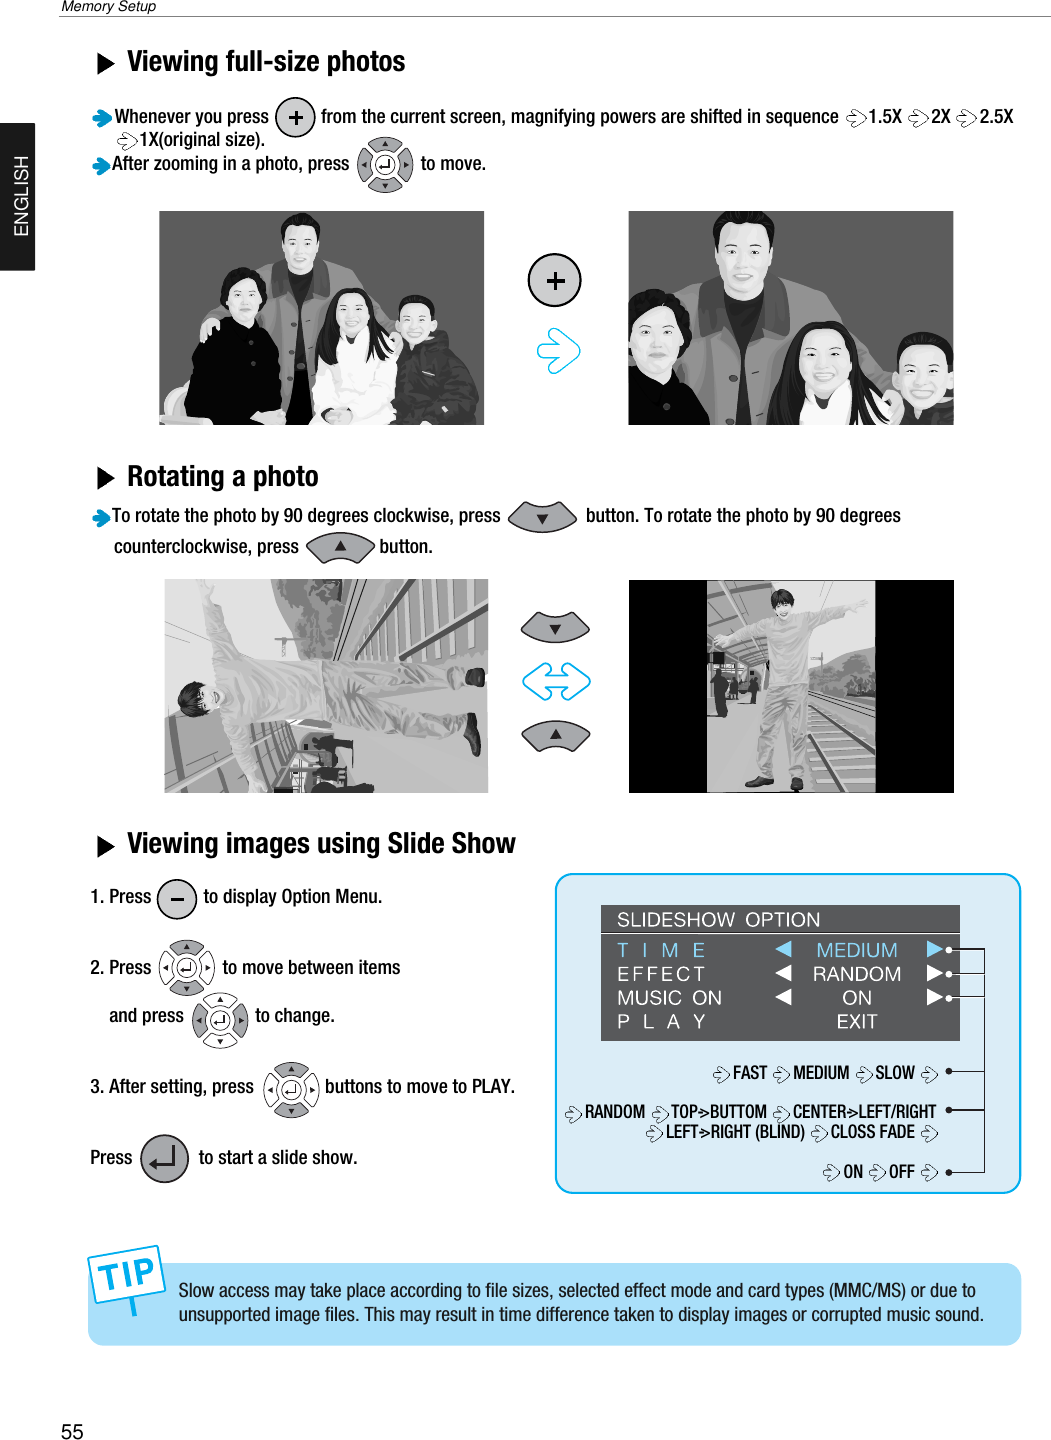 55Memory SetupENGLISHViewing full-size photos Whenever you press           from the current screen, magnifying powers are shifted in sequence  1.5X 2X 2.5X1X(original size).After zooming in a photo, press               to move.Rotating a photo To rotate the photo by 90 degrees clockwise, press                  button. To rotate the photo by 90 degrees counterclockwise, press                 button.Viewing images using Slide Show1. Press           to display Option Menu.2. Press               to move between items and press               to change.3. After setting, press               buttons to move to PLAY. Press              to start a slide show.Slow access may take place according to file sizes, selected effect mode and card types (MMC/MS) or due tounsupported image files. This may result in time difference taken to display images or corrupted music sound.FAST MEDIUM SLOWRANDOM TOP-&gt;BUTTOM  CENTER-&gt;LEFT/RIGHTLEFT-&gt;RIGHT (BLIND)  CLOSS FADE ON OFF